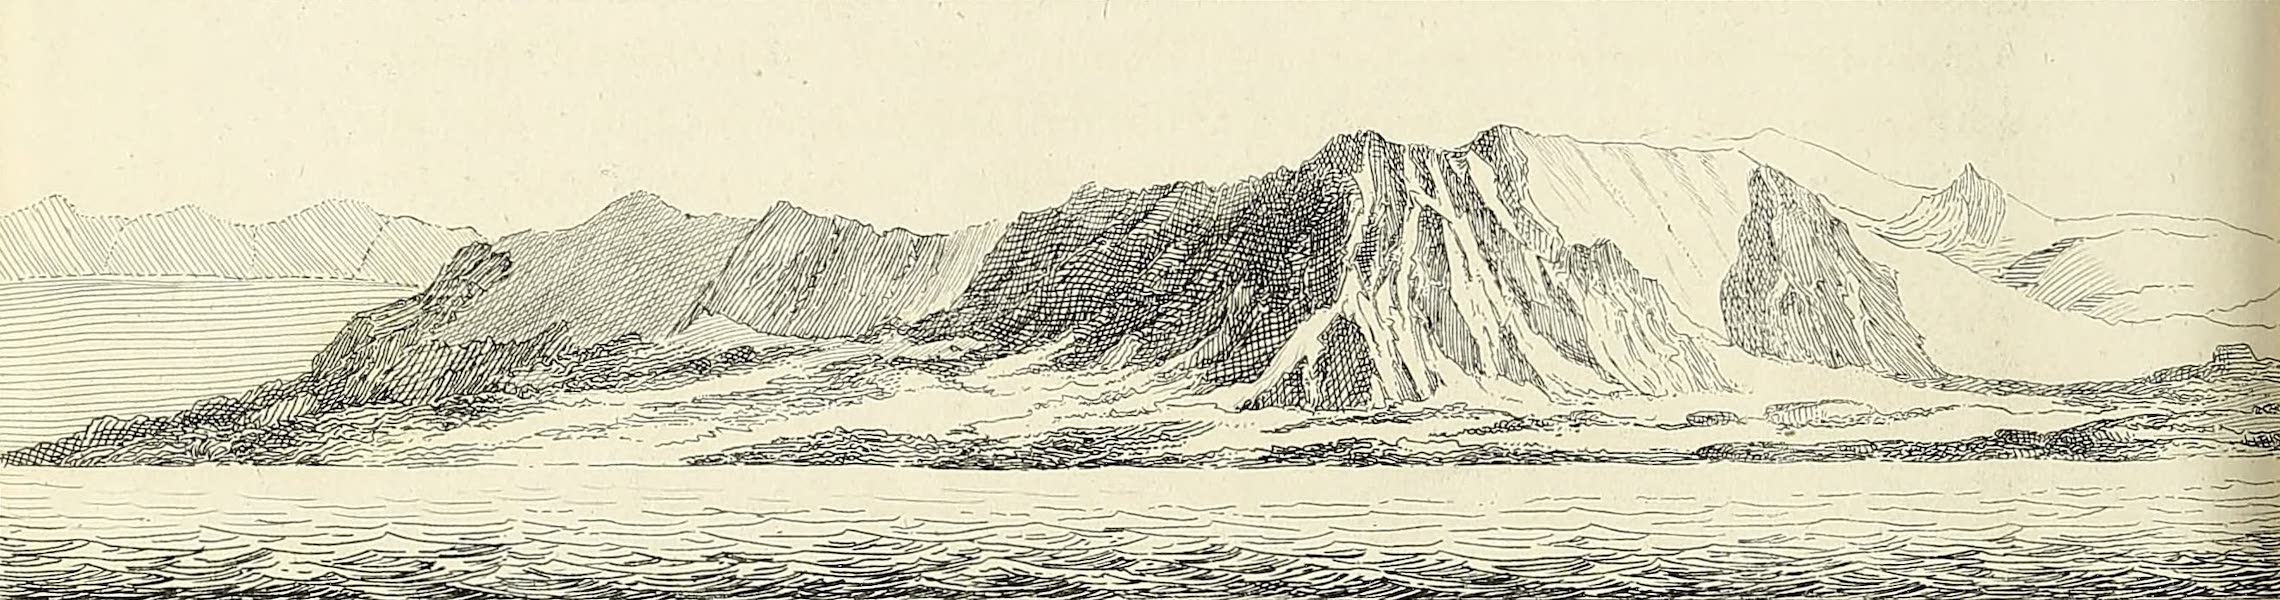 Journal of a Voyage for the Discovery of a North-West Passage - Land to the Westward of Hope's Monument  (1821)